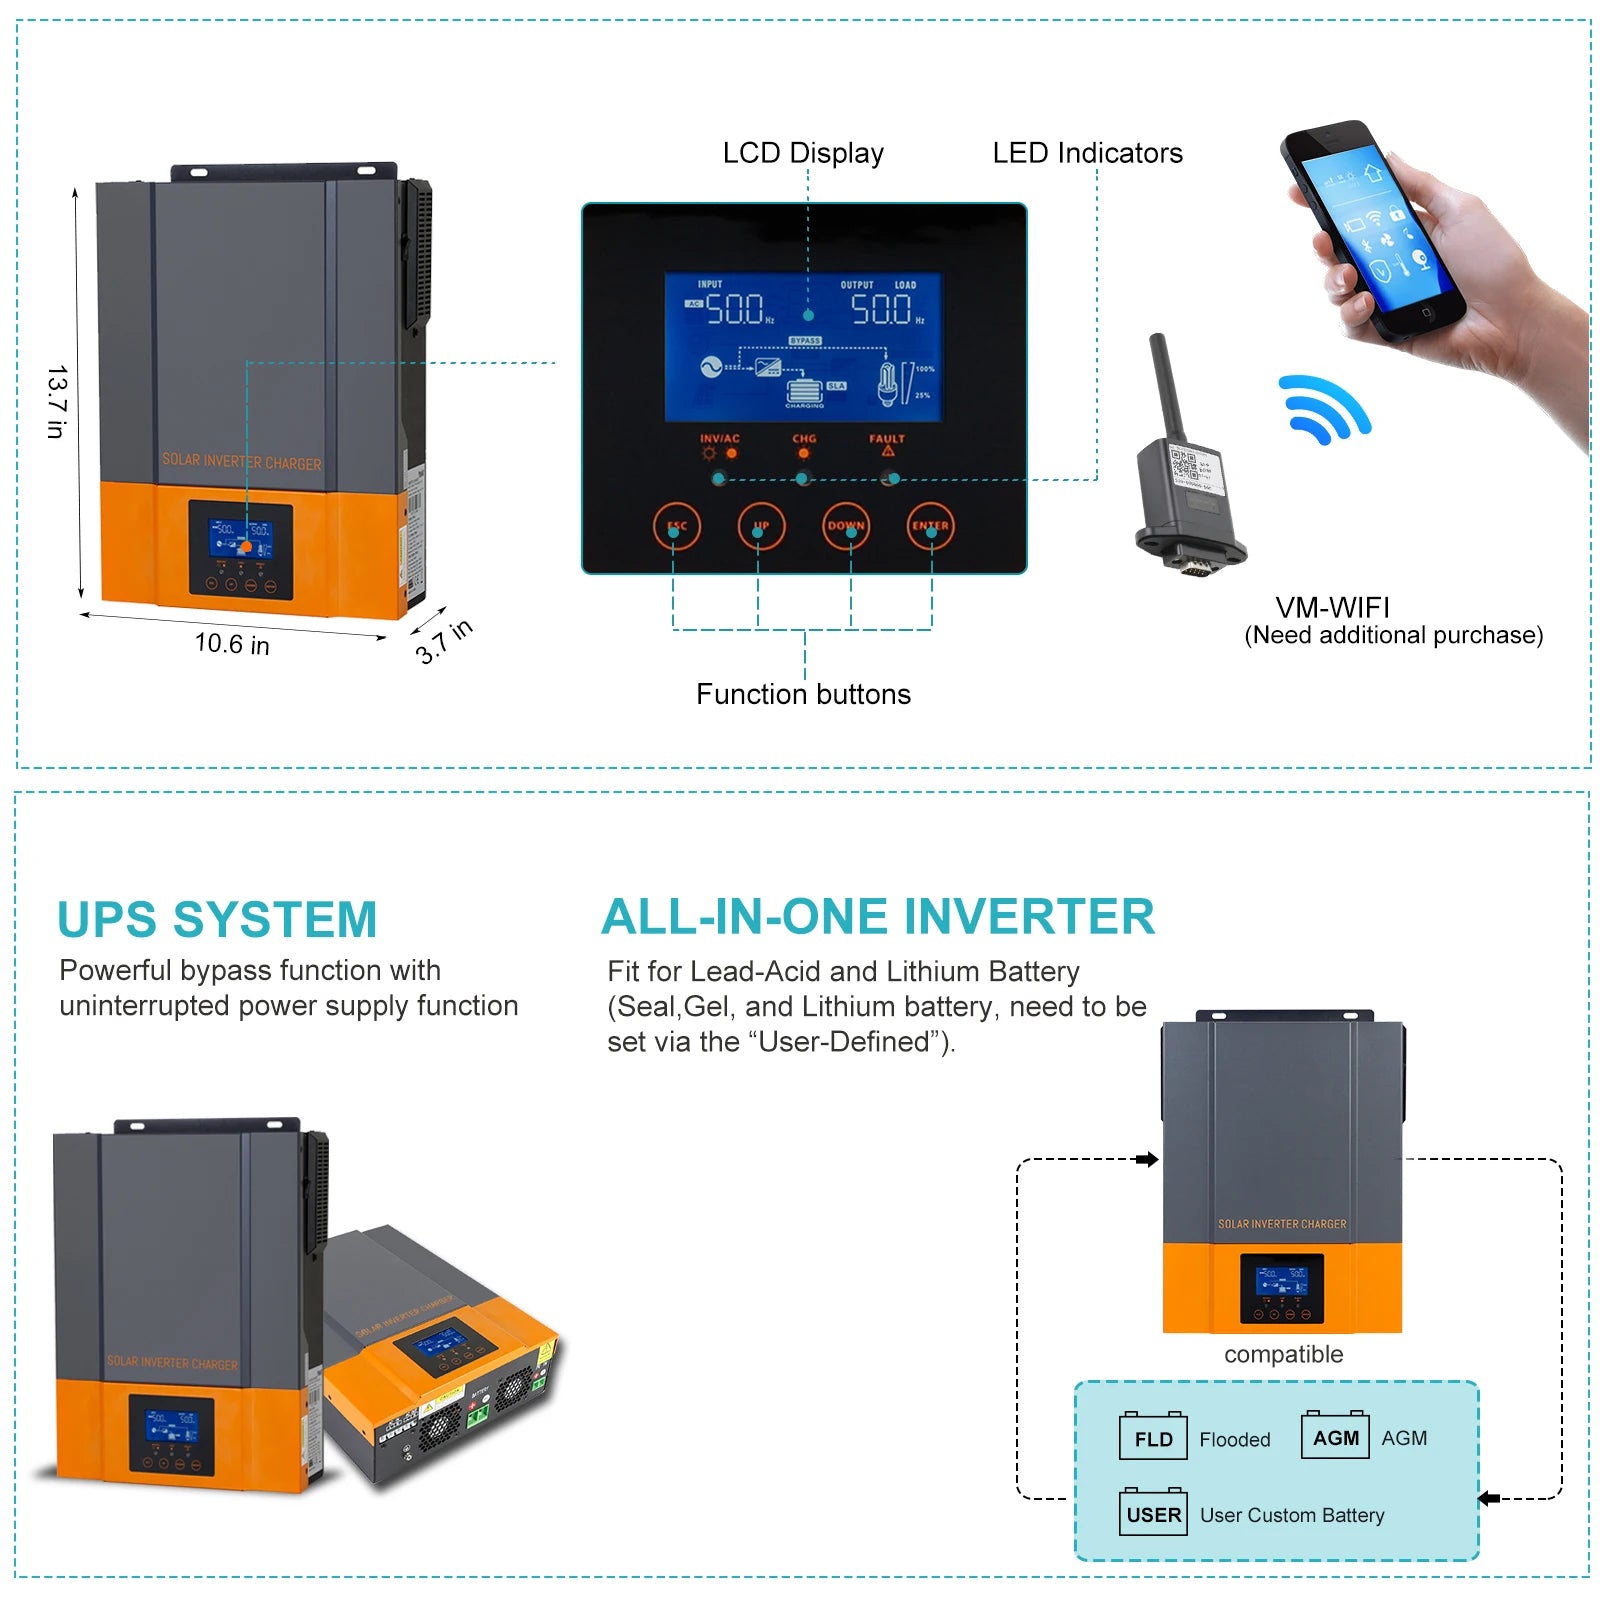 PowMr 3.2KW hybrid solar inverter features LCD display, LED indicators, and built-in MPPT controller with customizable settings.